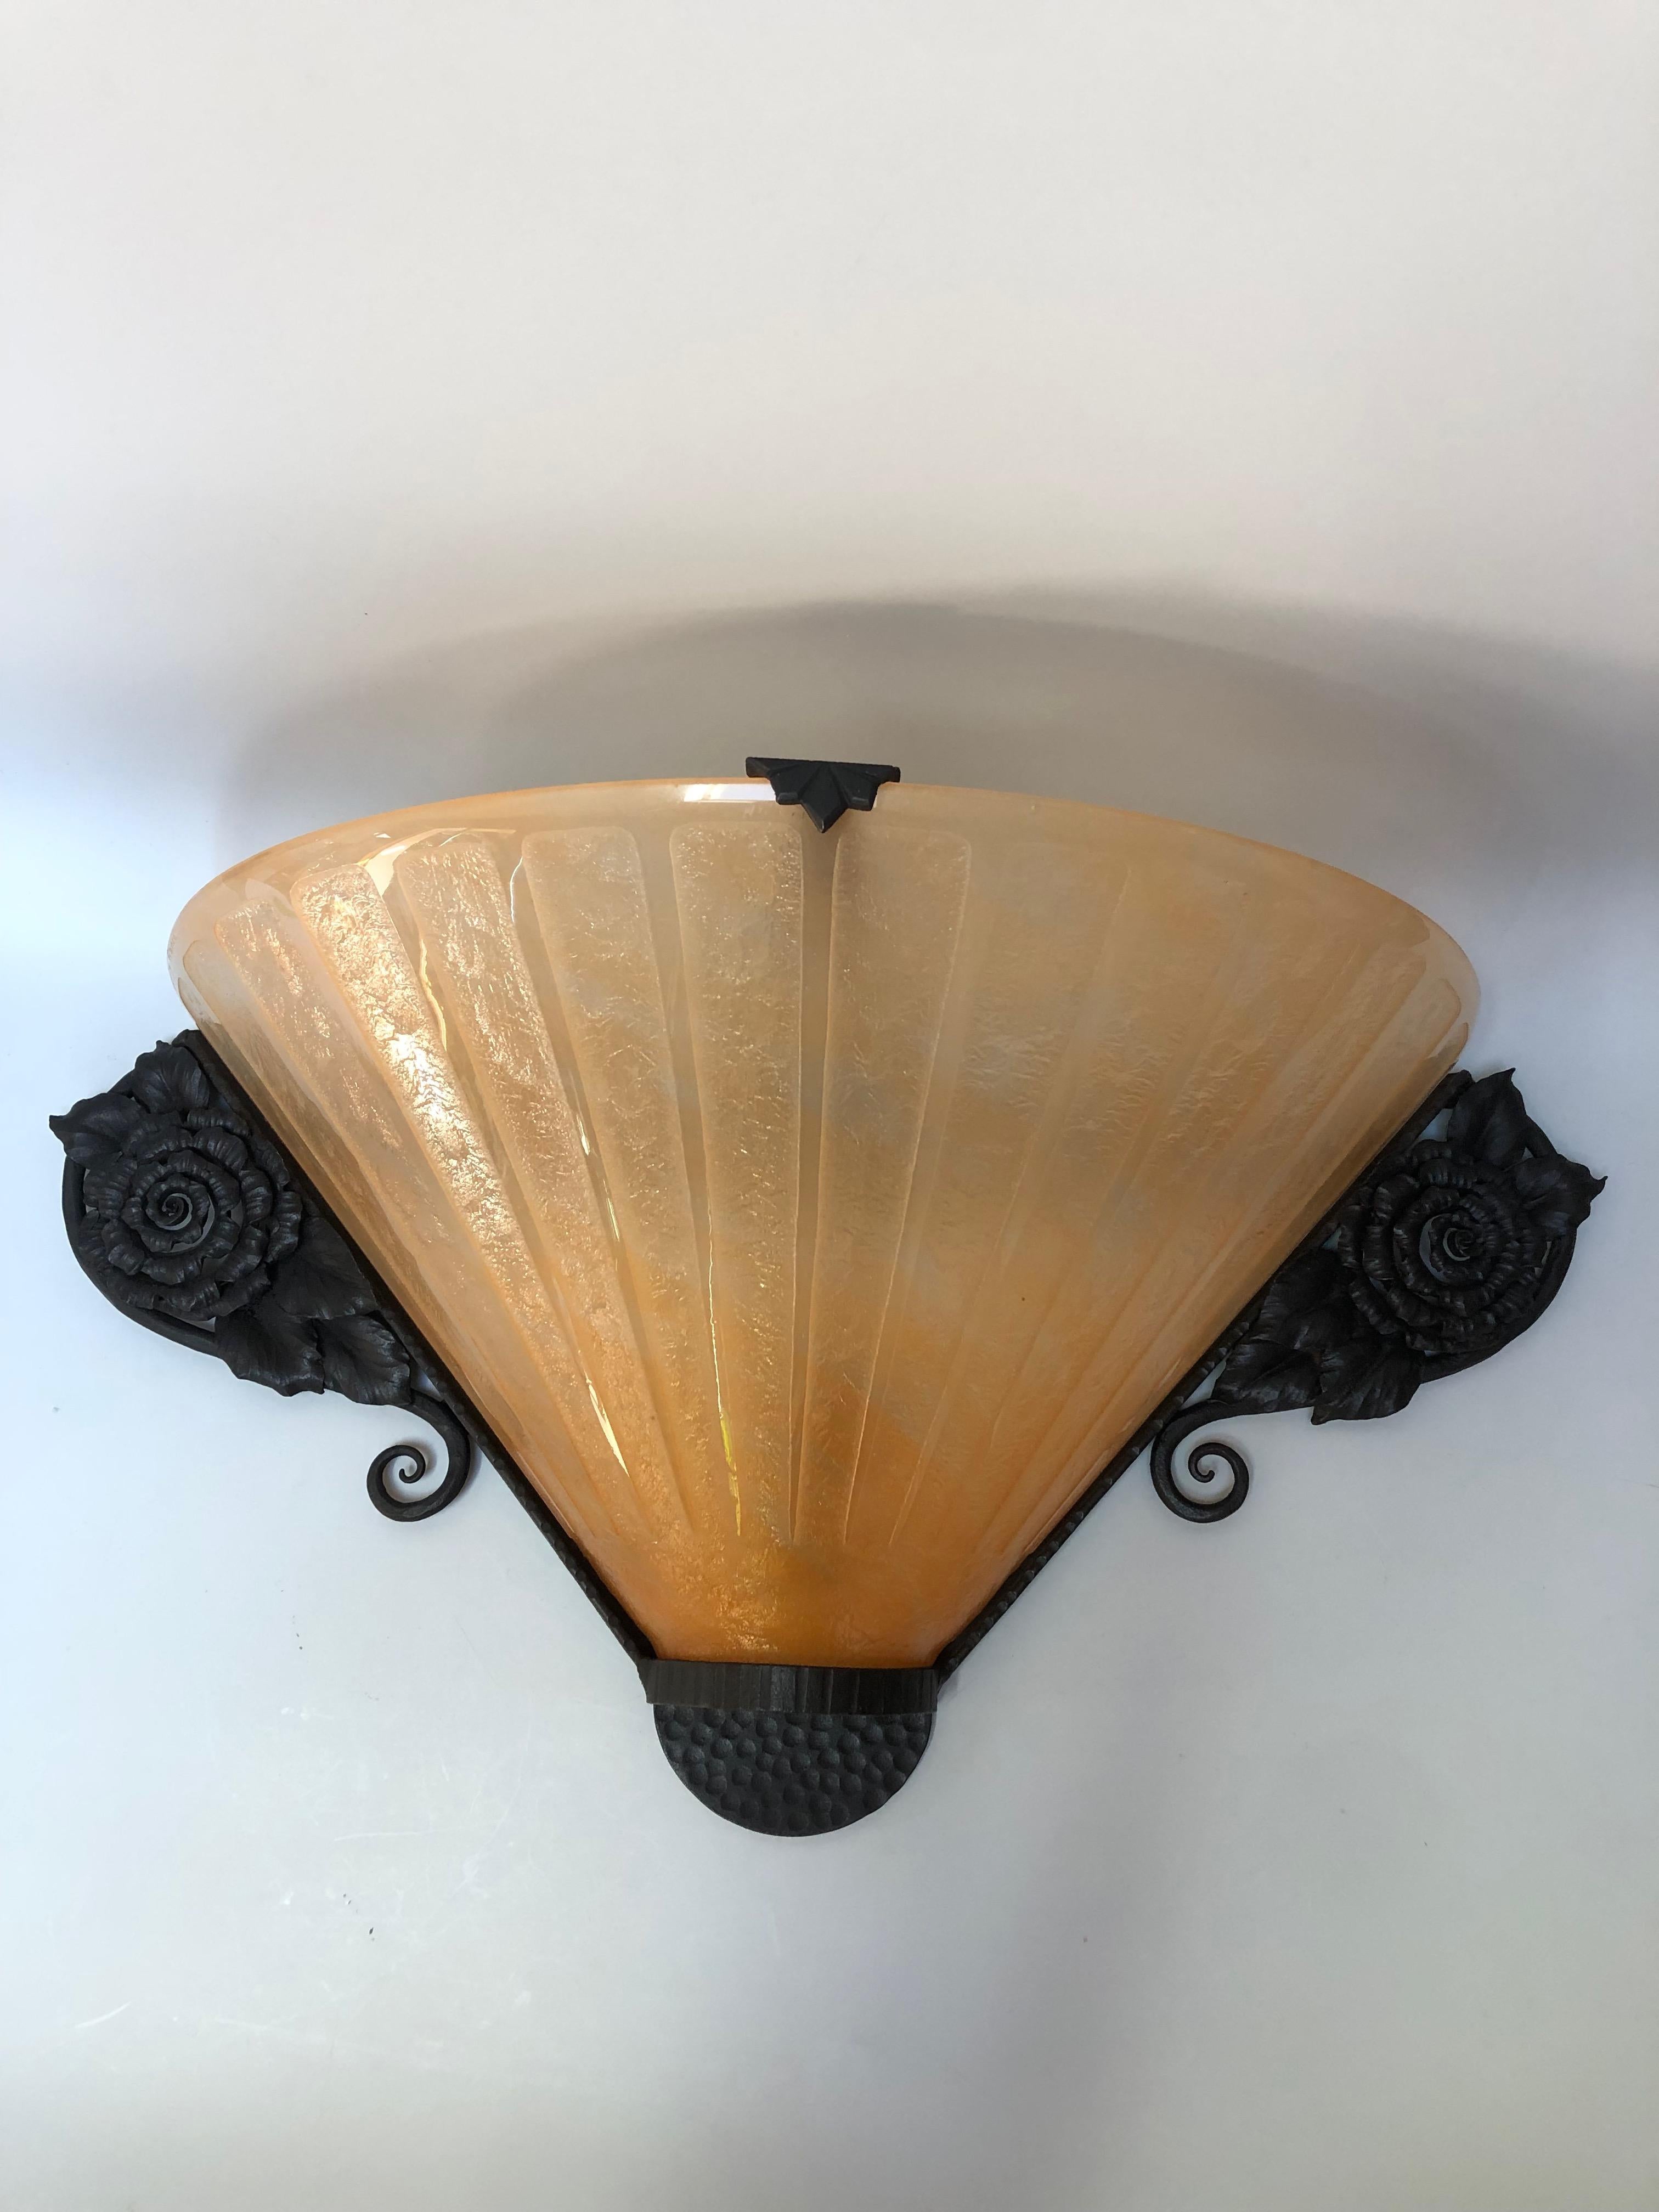 Daum Nancy, large wall lamp circa 1930.
Wrought iron mount attributed to Louis Katona.
Acid-etched Daum glassware, orange speckled signed Daum Nancy France.
Electrified and in perfect condition.

Total height: 25 cm
Width: 52cm
Depth: 22cm
Weight: 5